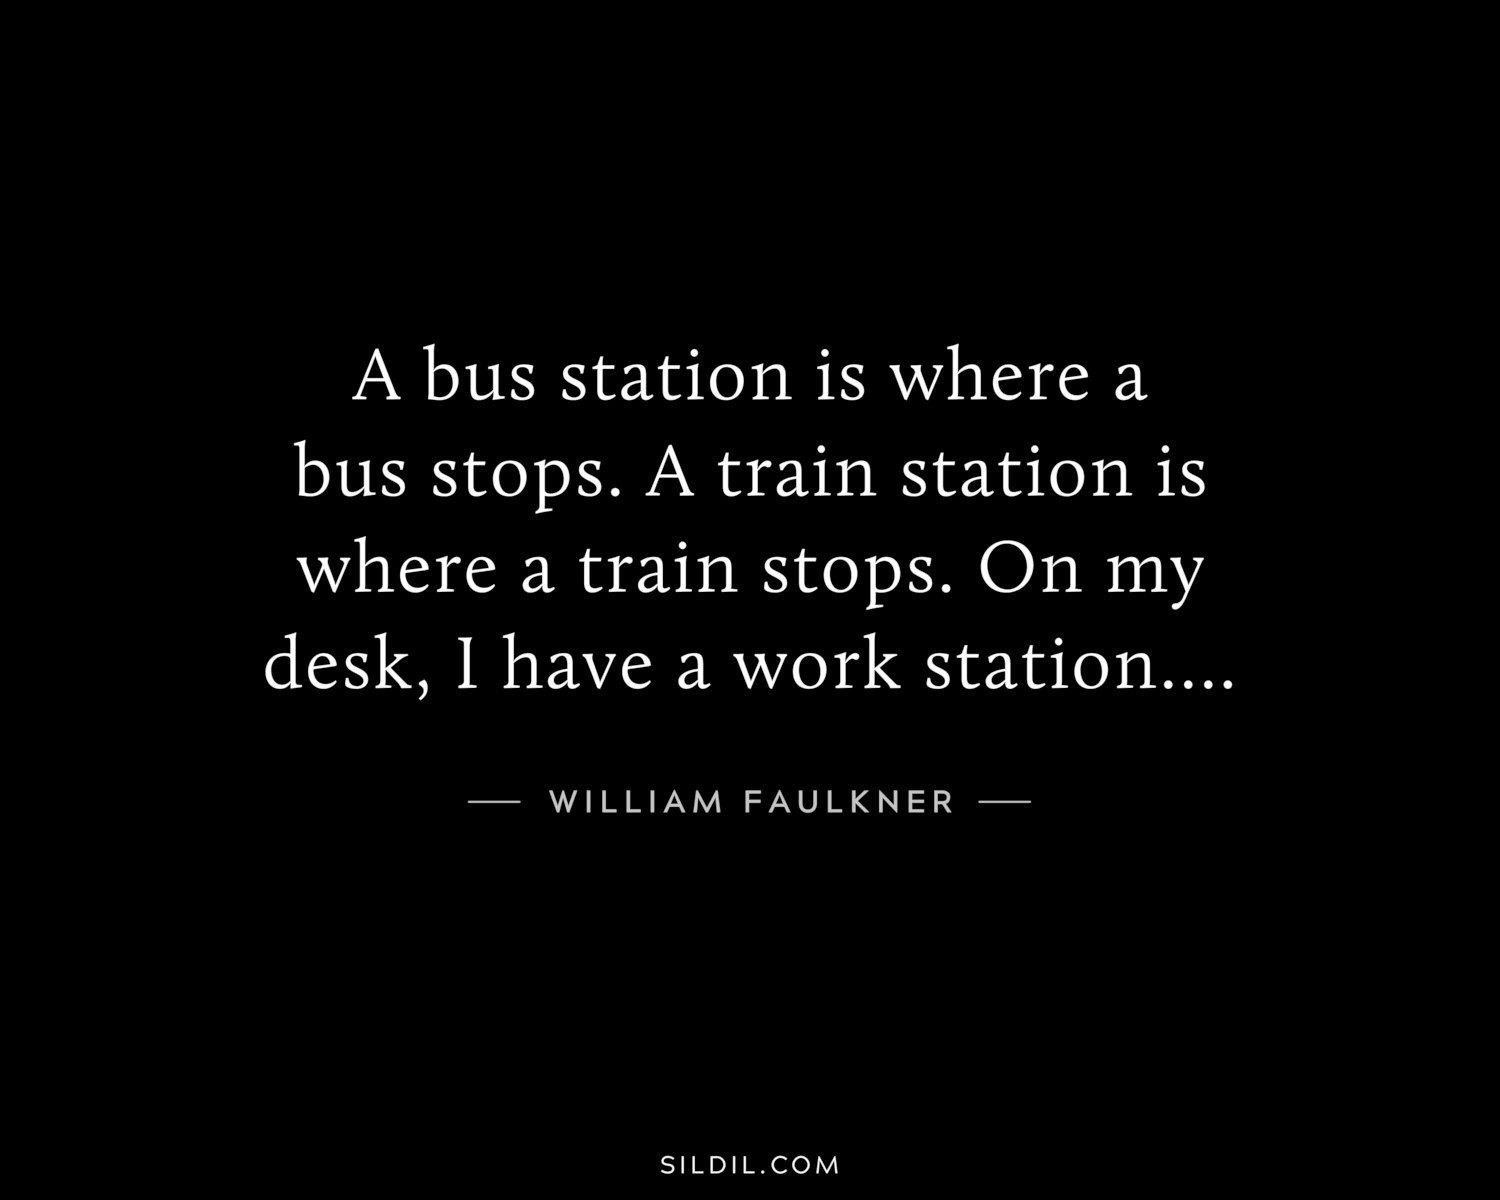 A bus station is where a bus stops. A train station is where a train stops. On my desk, I have a work station….